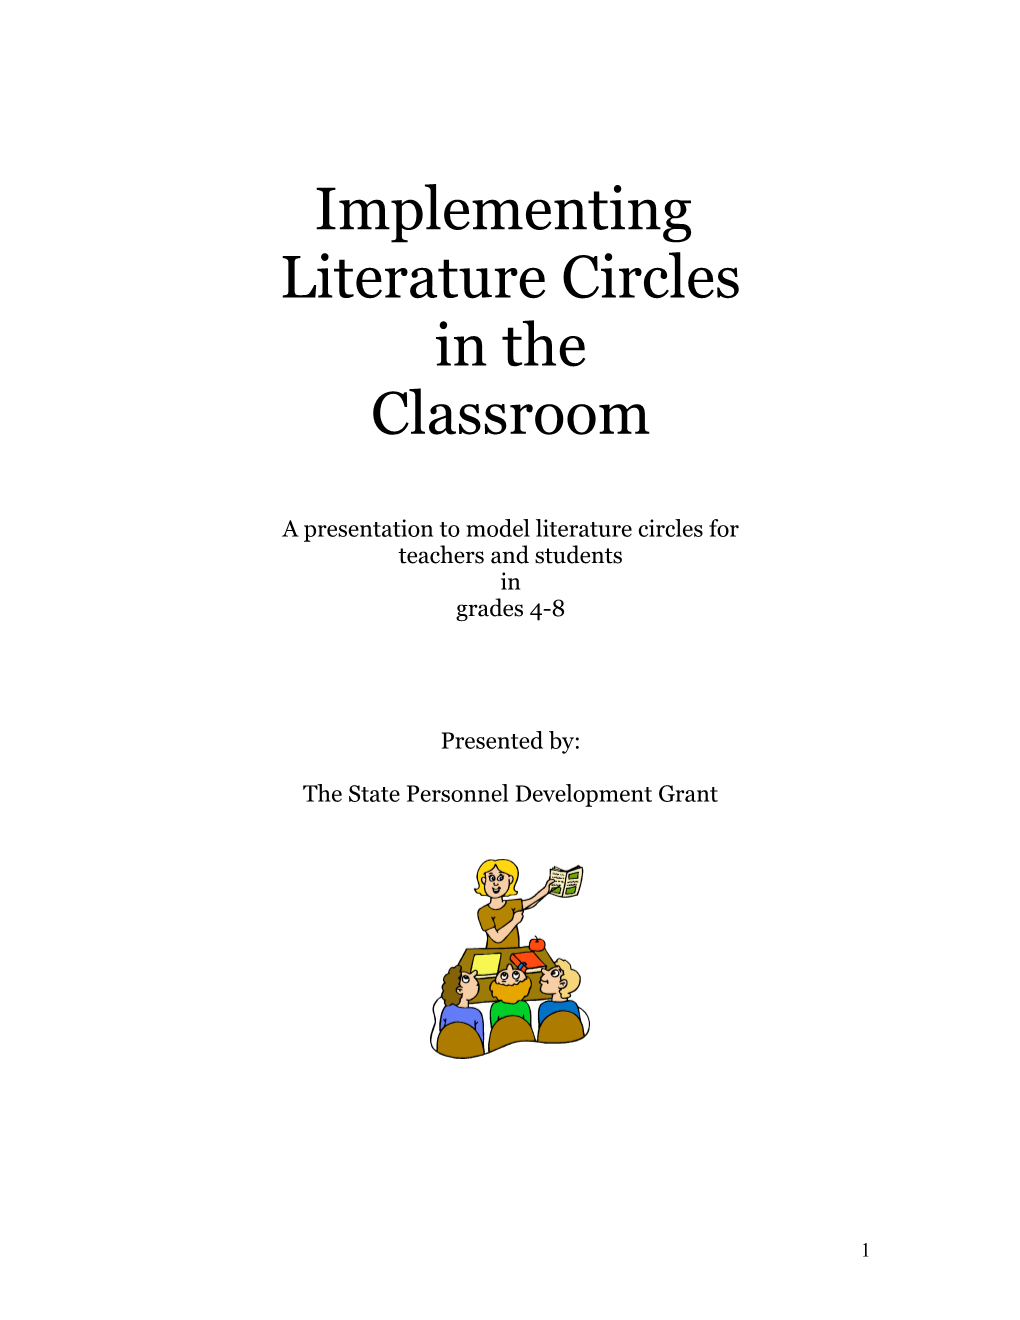 Implementing Literature Circles in the Classroom